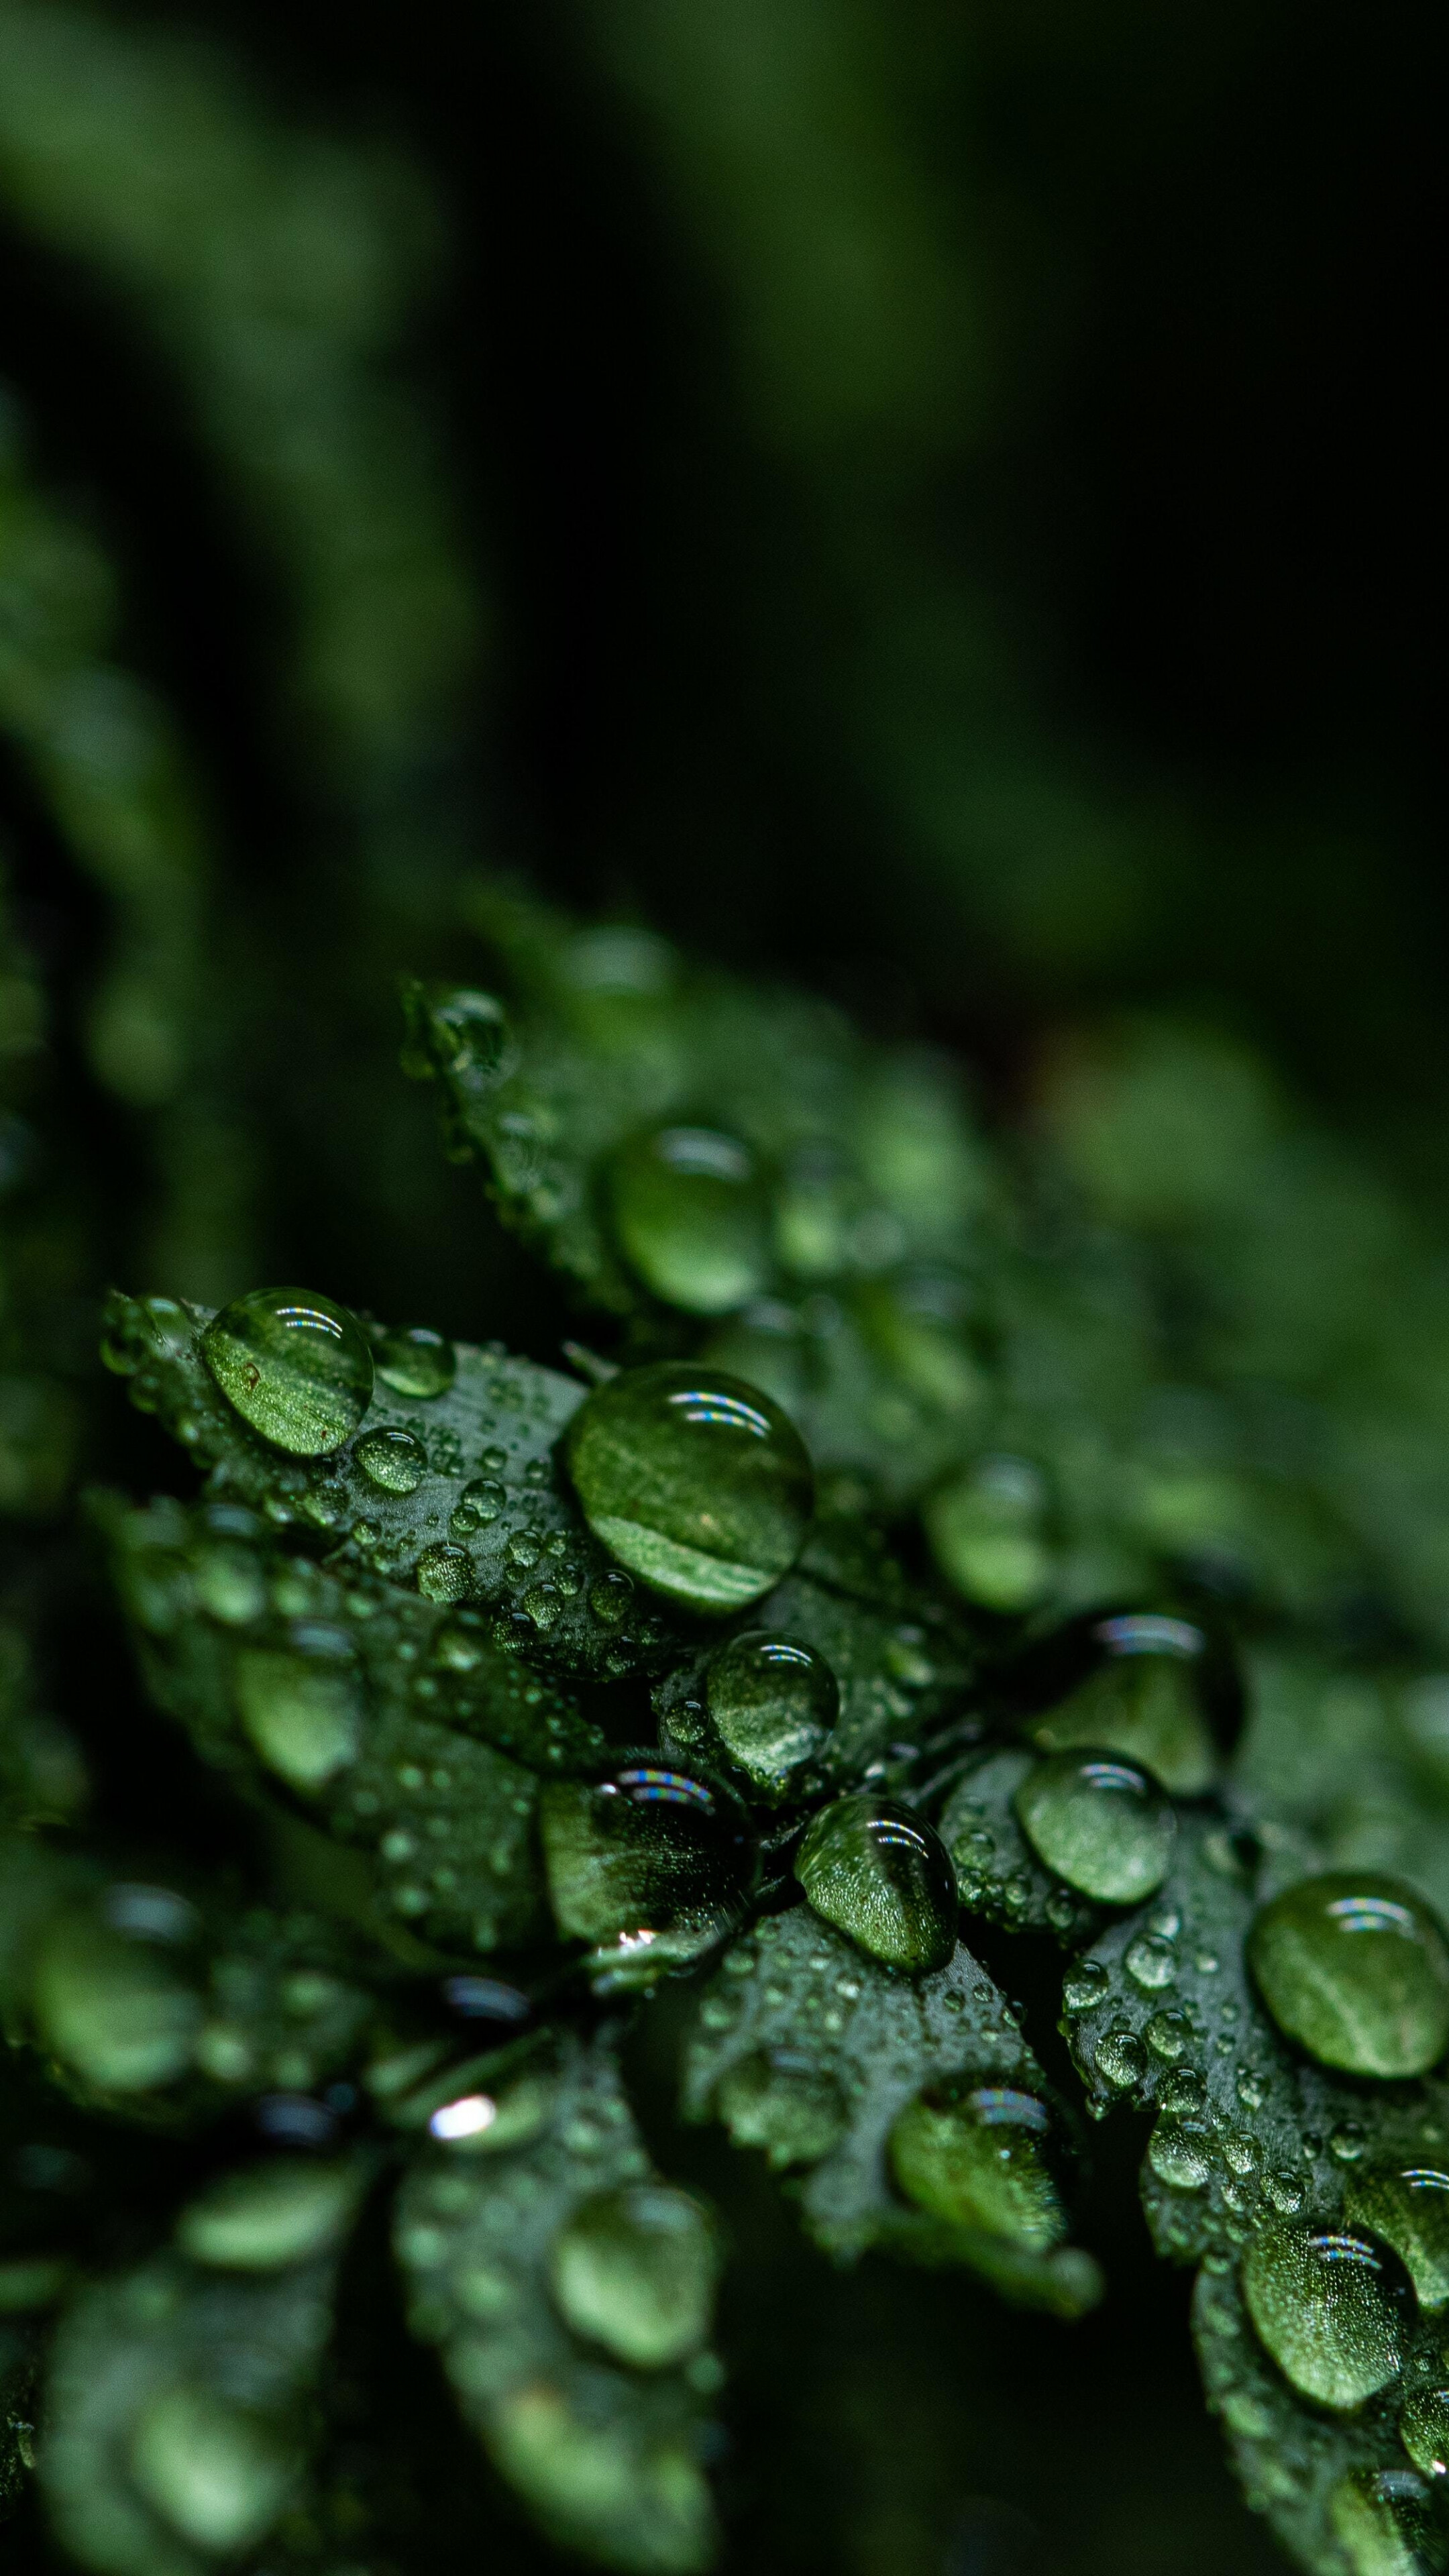 Go Green: Droplets of water on the leaf, Moisture evaporating from plants, Leaves dripping water. 2160x3840 4K Wallpaper.